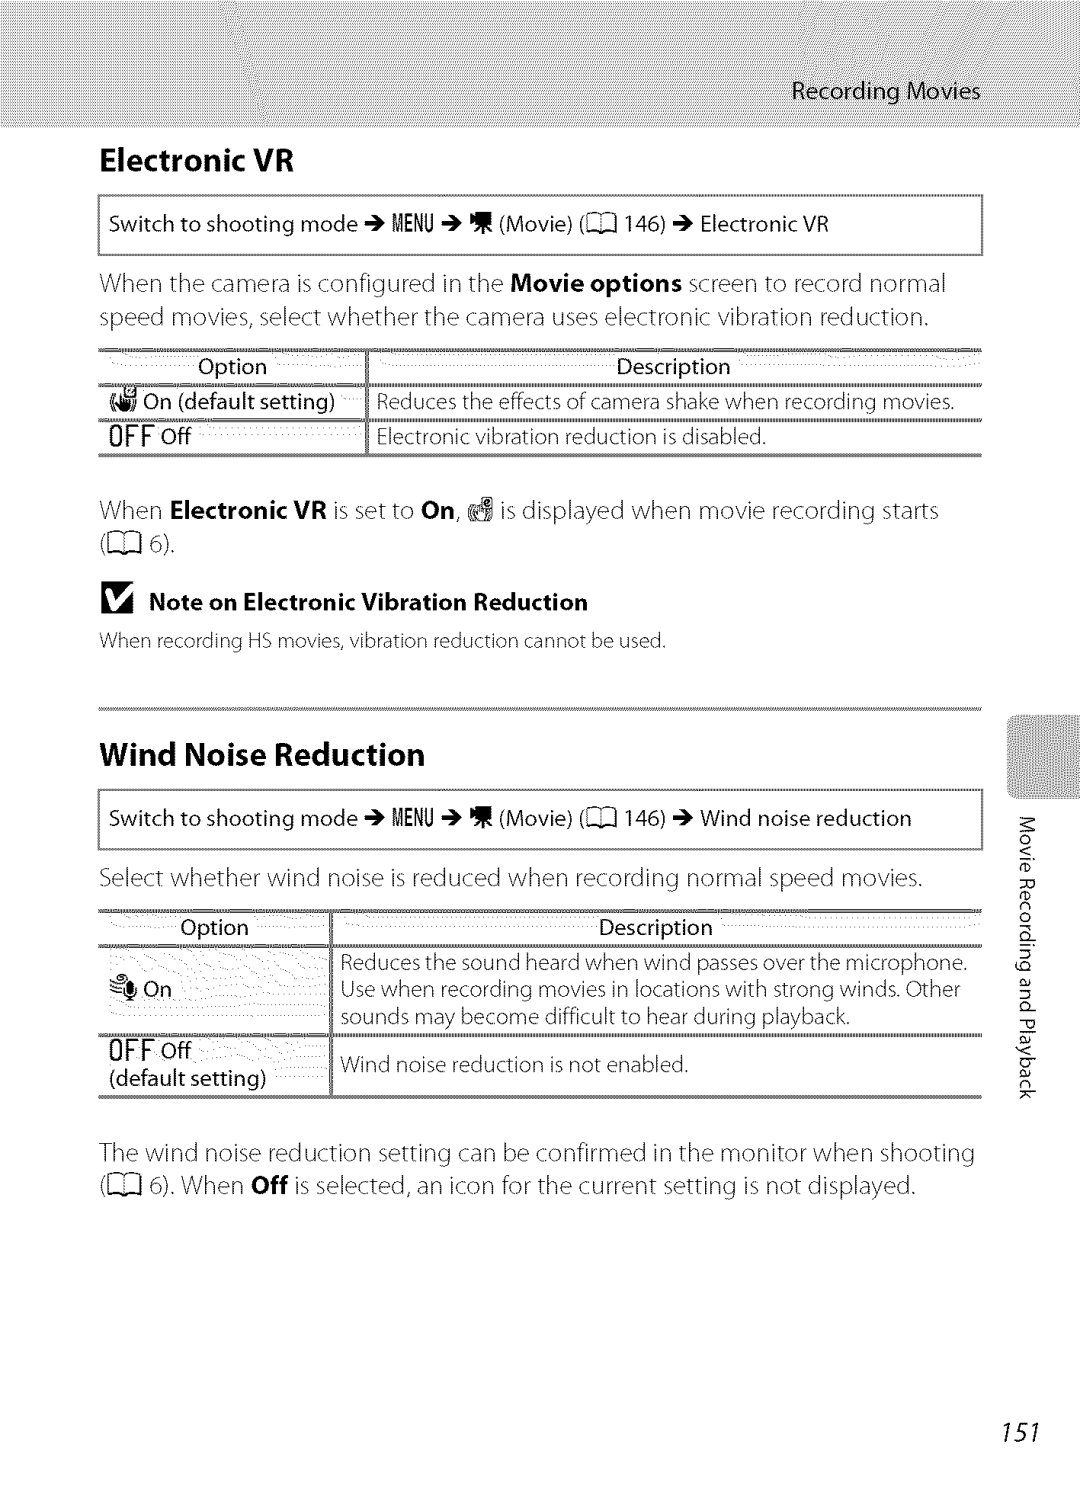 Nikon S9100 user manual Electronic VR, Wind Noise Reduction, Note on Electronic Vibration Reduction 